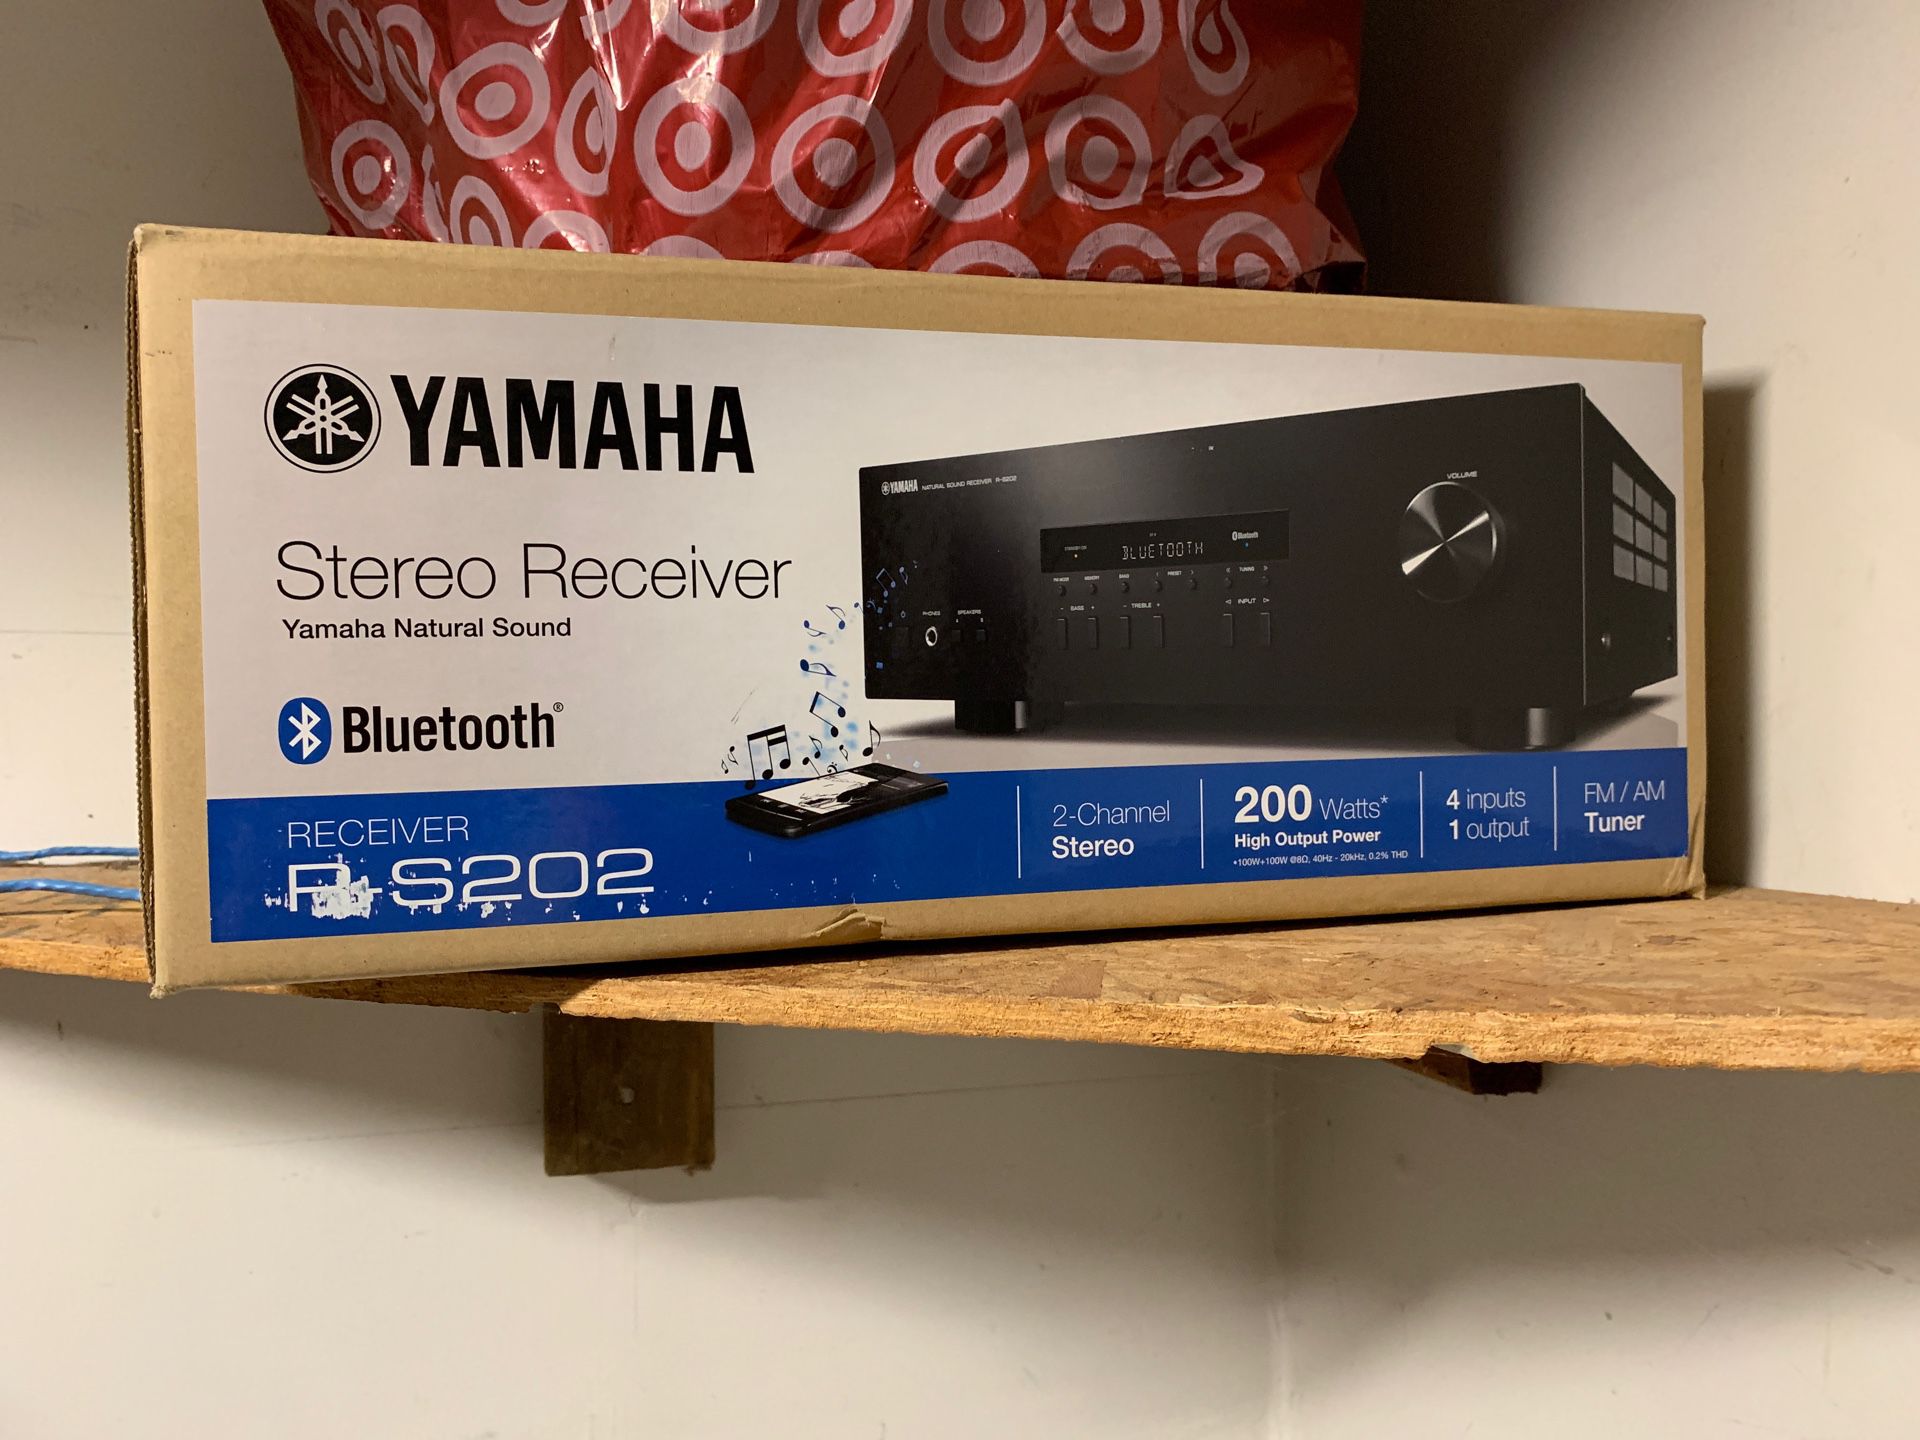 Yamaha Stereo Receiver R-S202